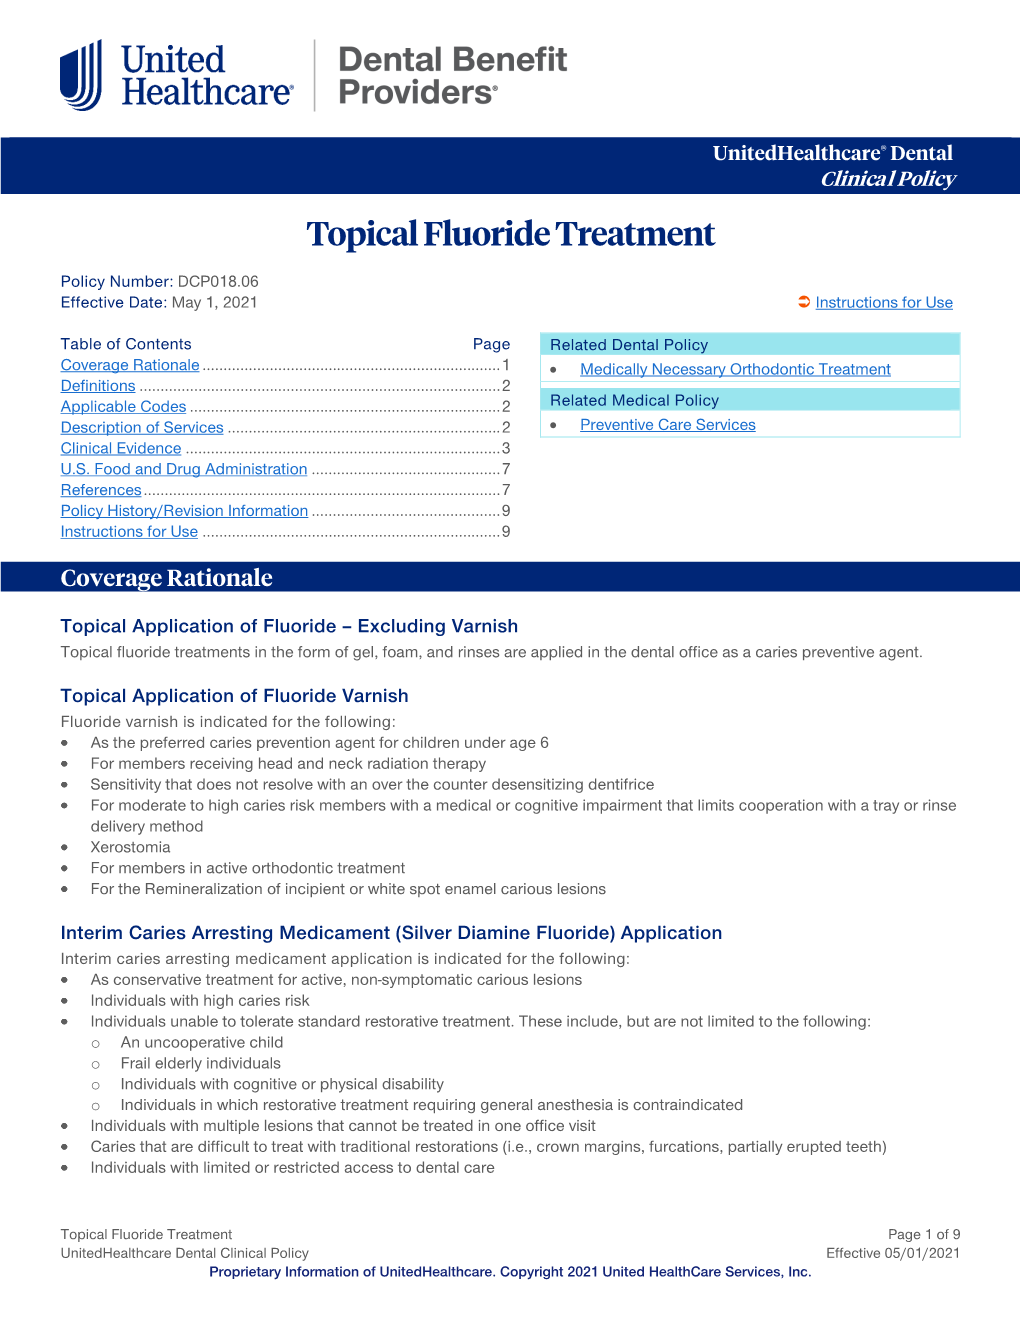 Topical Fluoride Treatment – Dental Clinical Policy